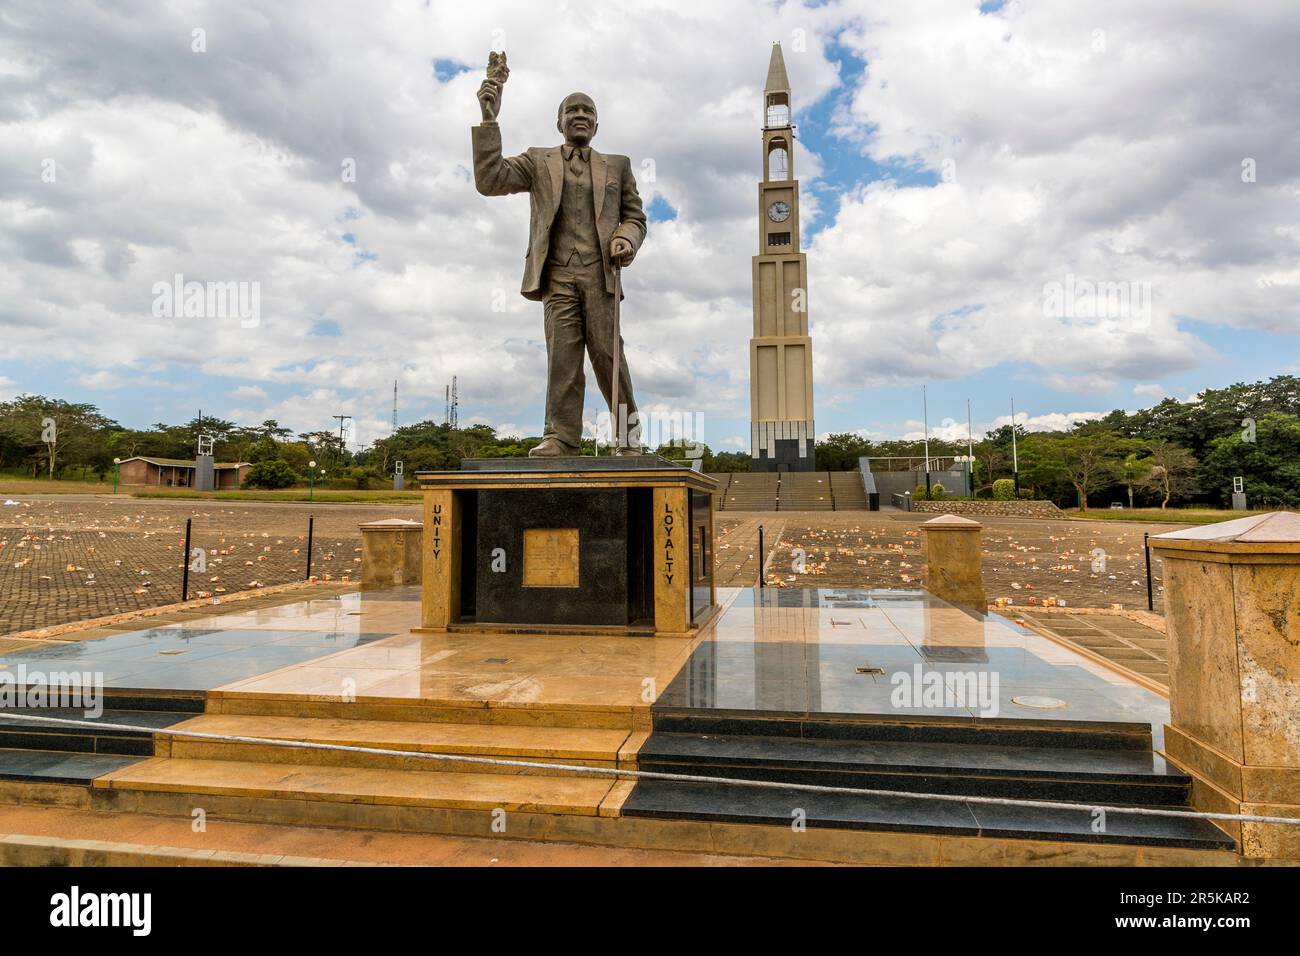 Memorial War Tower, Lilongwe. Memorial honoring all soldiers and civilians who died in World War I, World War II, and other military operations inside and outside Malawi. In the foreground the statue of the first President of Malawi, Dr. Hastings Kamuzu Banda. In memory of his birthday, commemorative ceremonies are held every May 14 at the grave and monument of the first president of Malawi, Dr. Hastings Kamuzu Banda in Lilongwe, Malawi Stock Photo